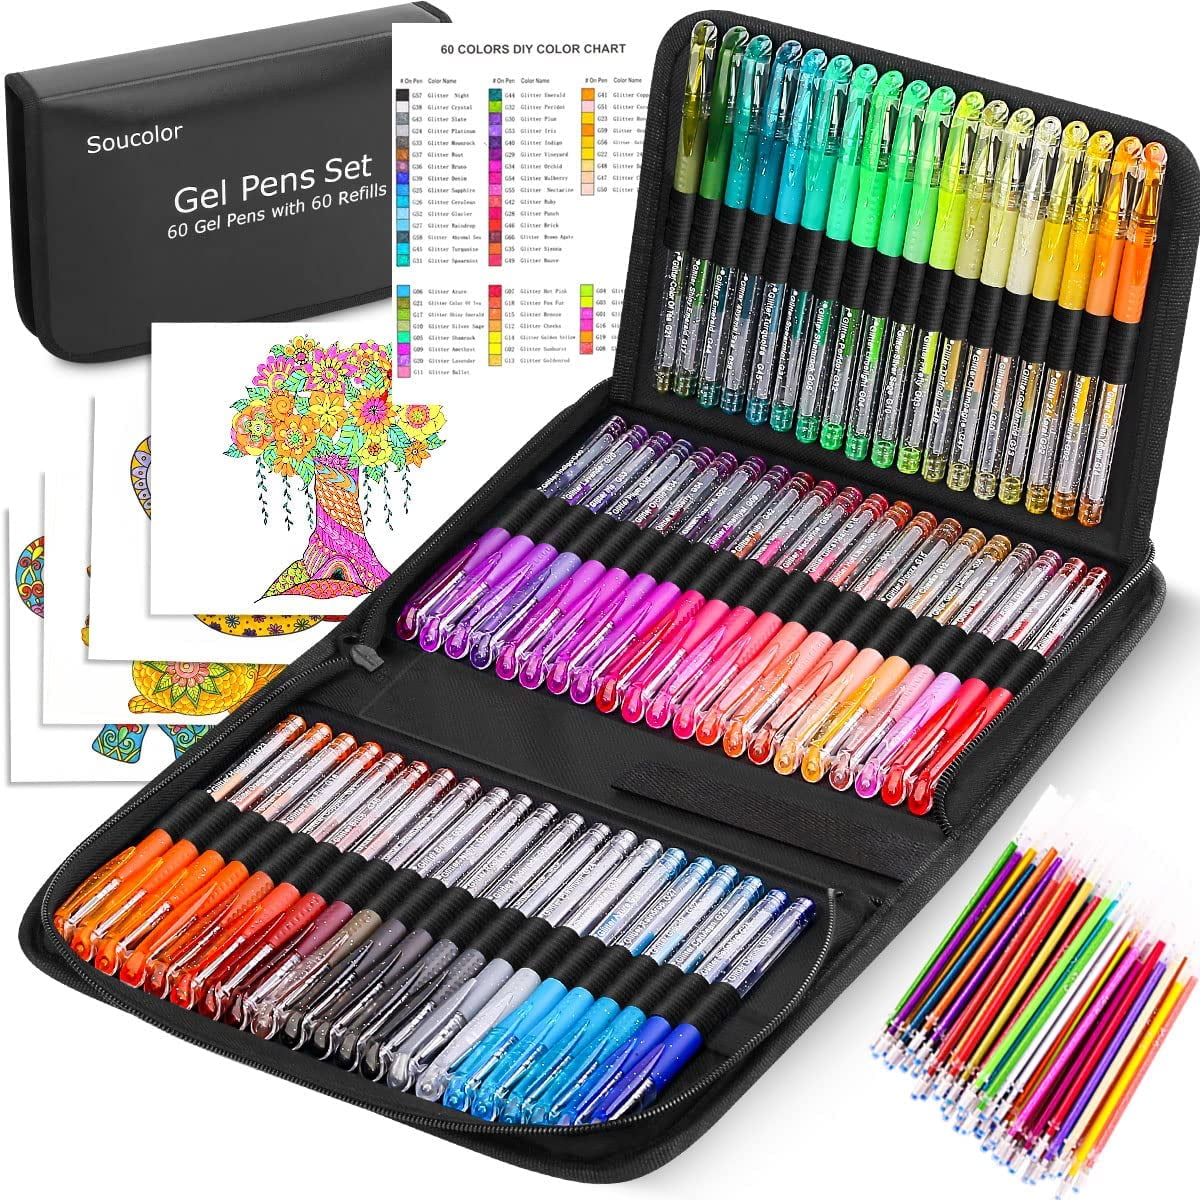 Soucolor Art Supplies, 283 Pieces Drawing Set Art Kits with Trifold Easel,  2 Drawing Pads, 1 Coloring Book, Crayons, Pastels, Arts and Crafts Gifts  Case for Kids Girls Boys Teens Beginners